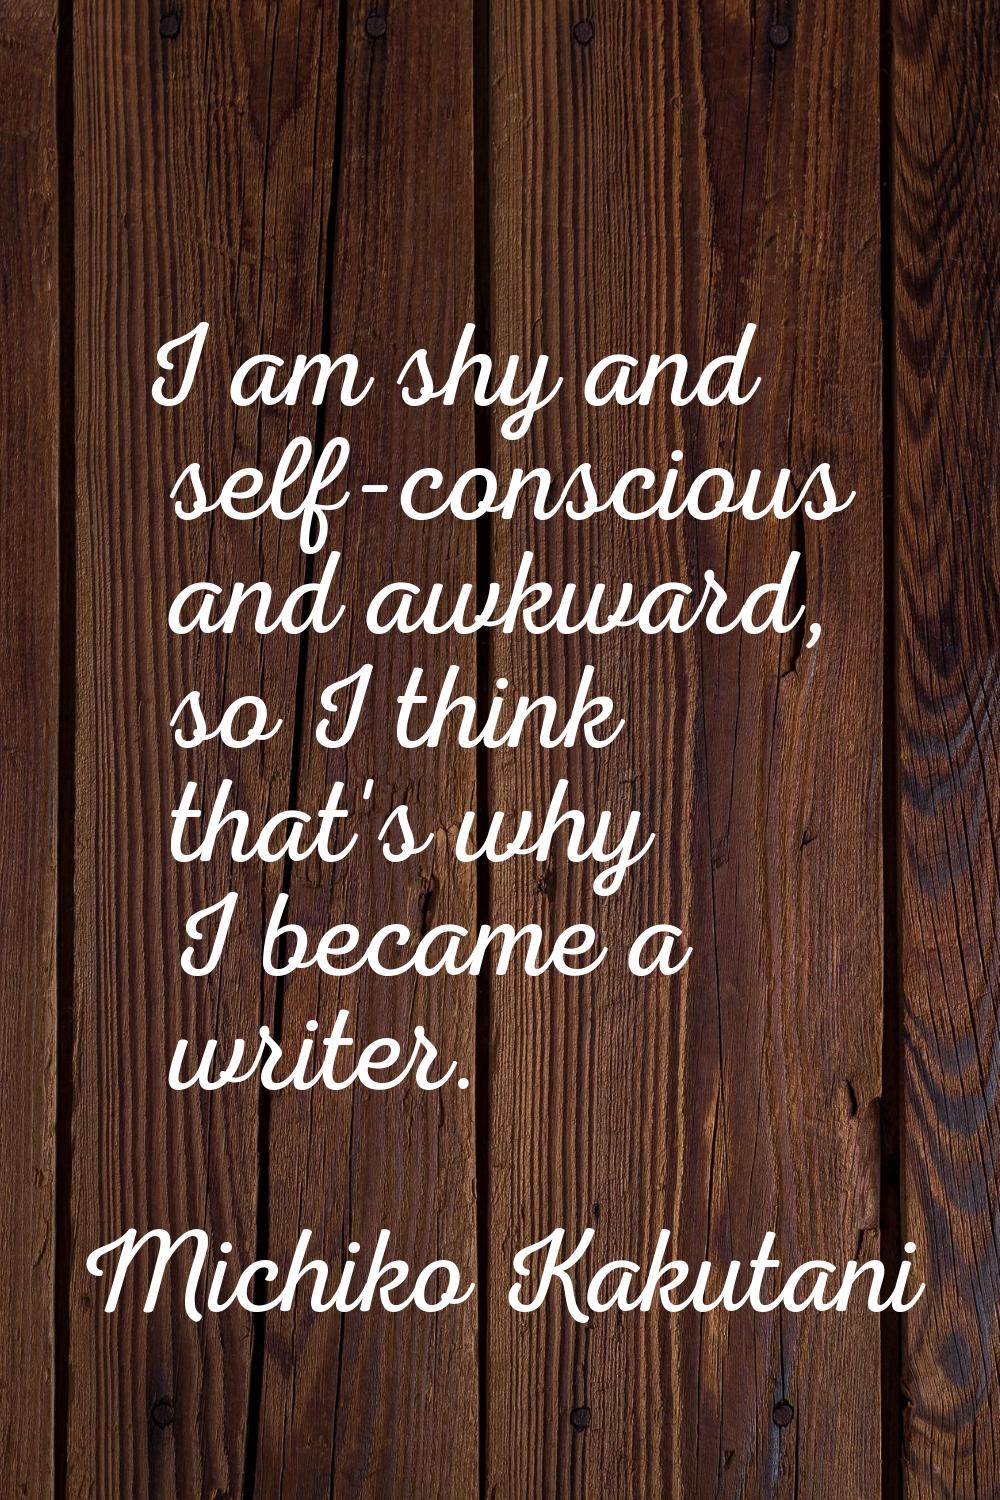 I am shy and self-conscious and awkward, so I think that's why I became a writer.